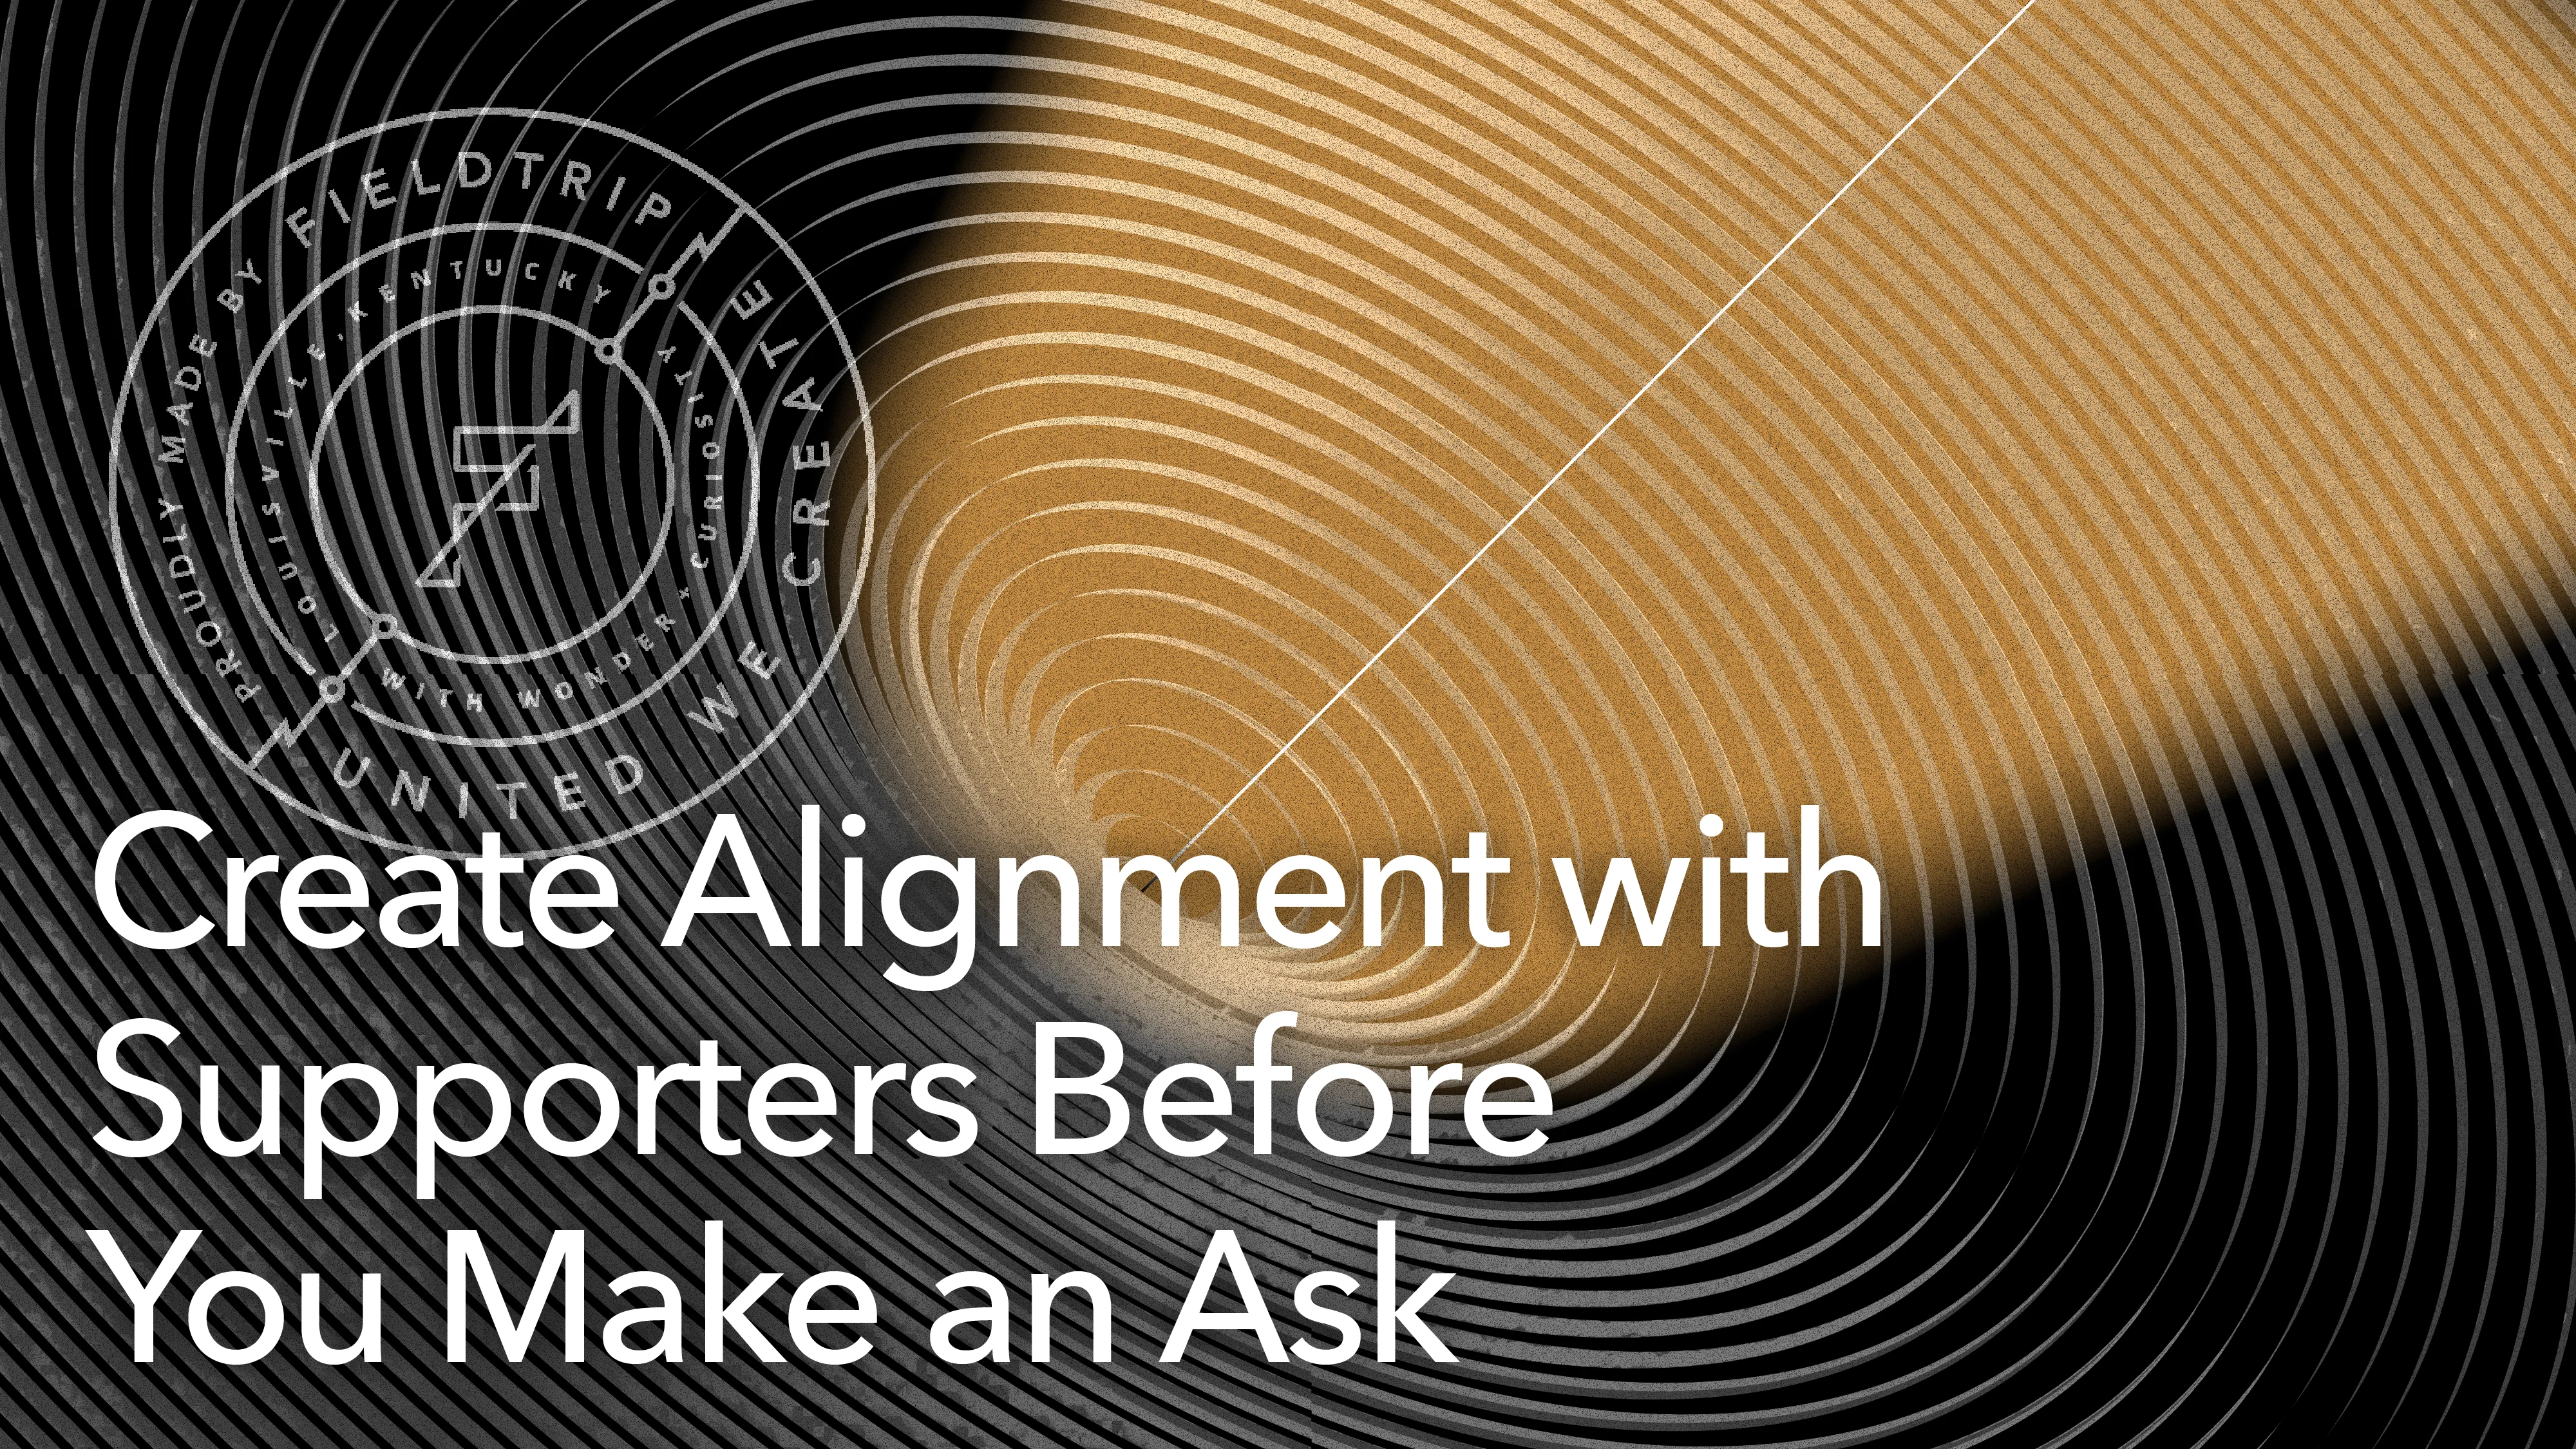 Create alignment with supporters before you make an ask.